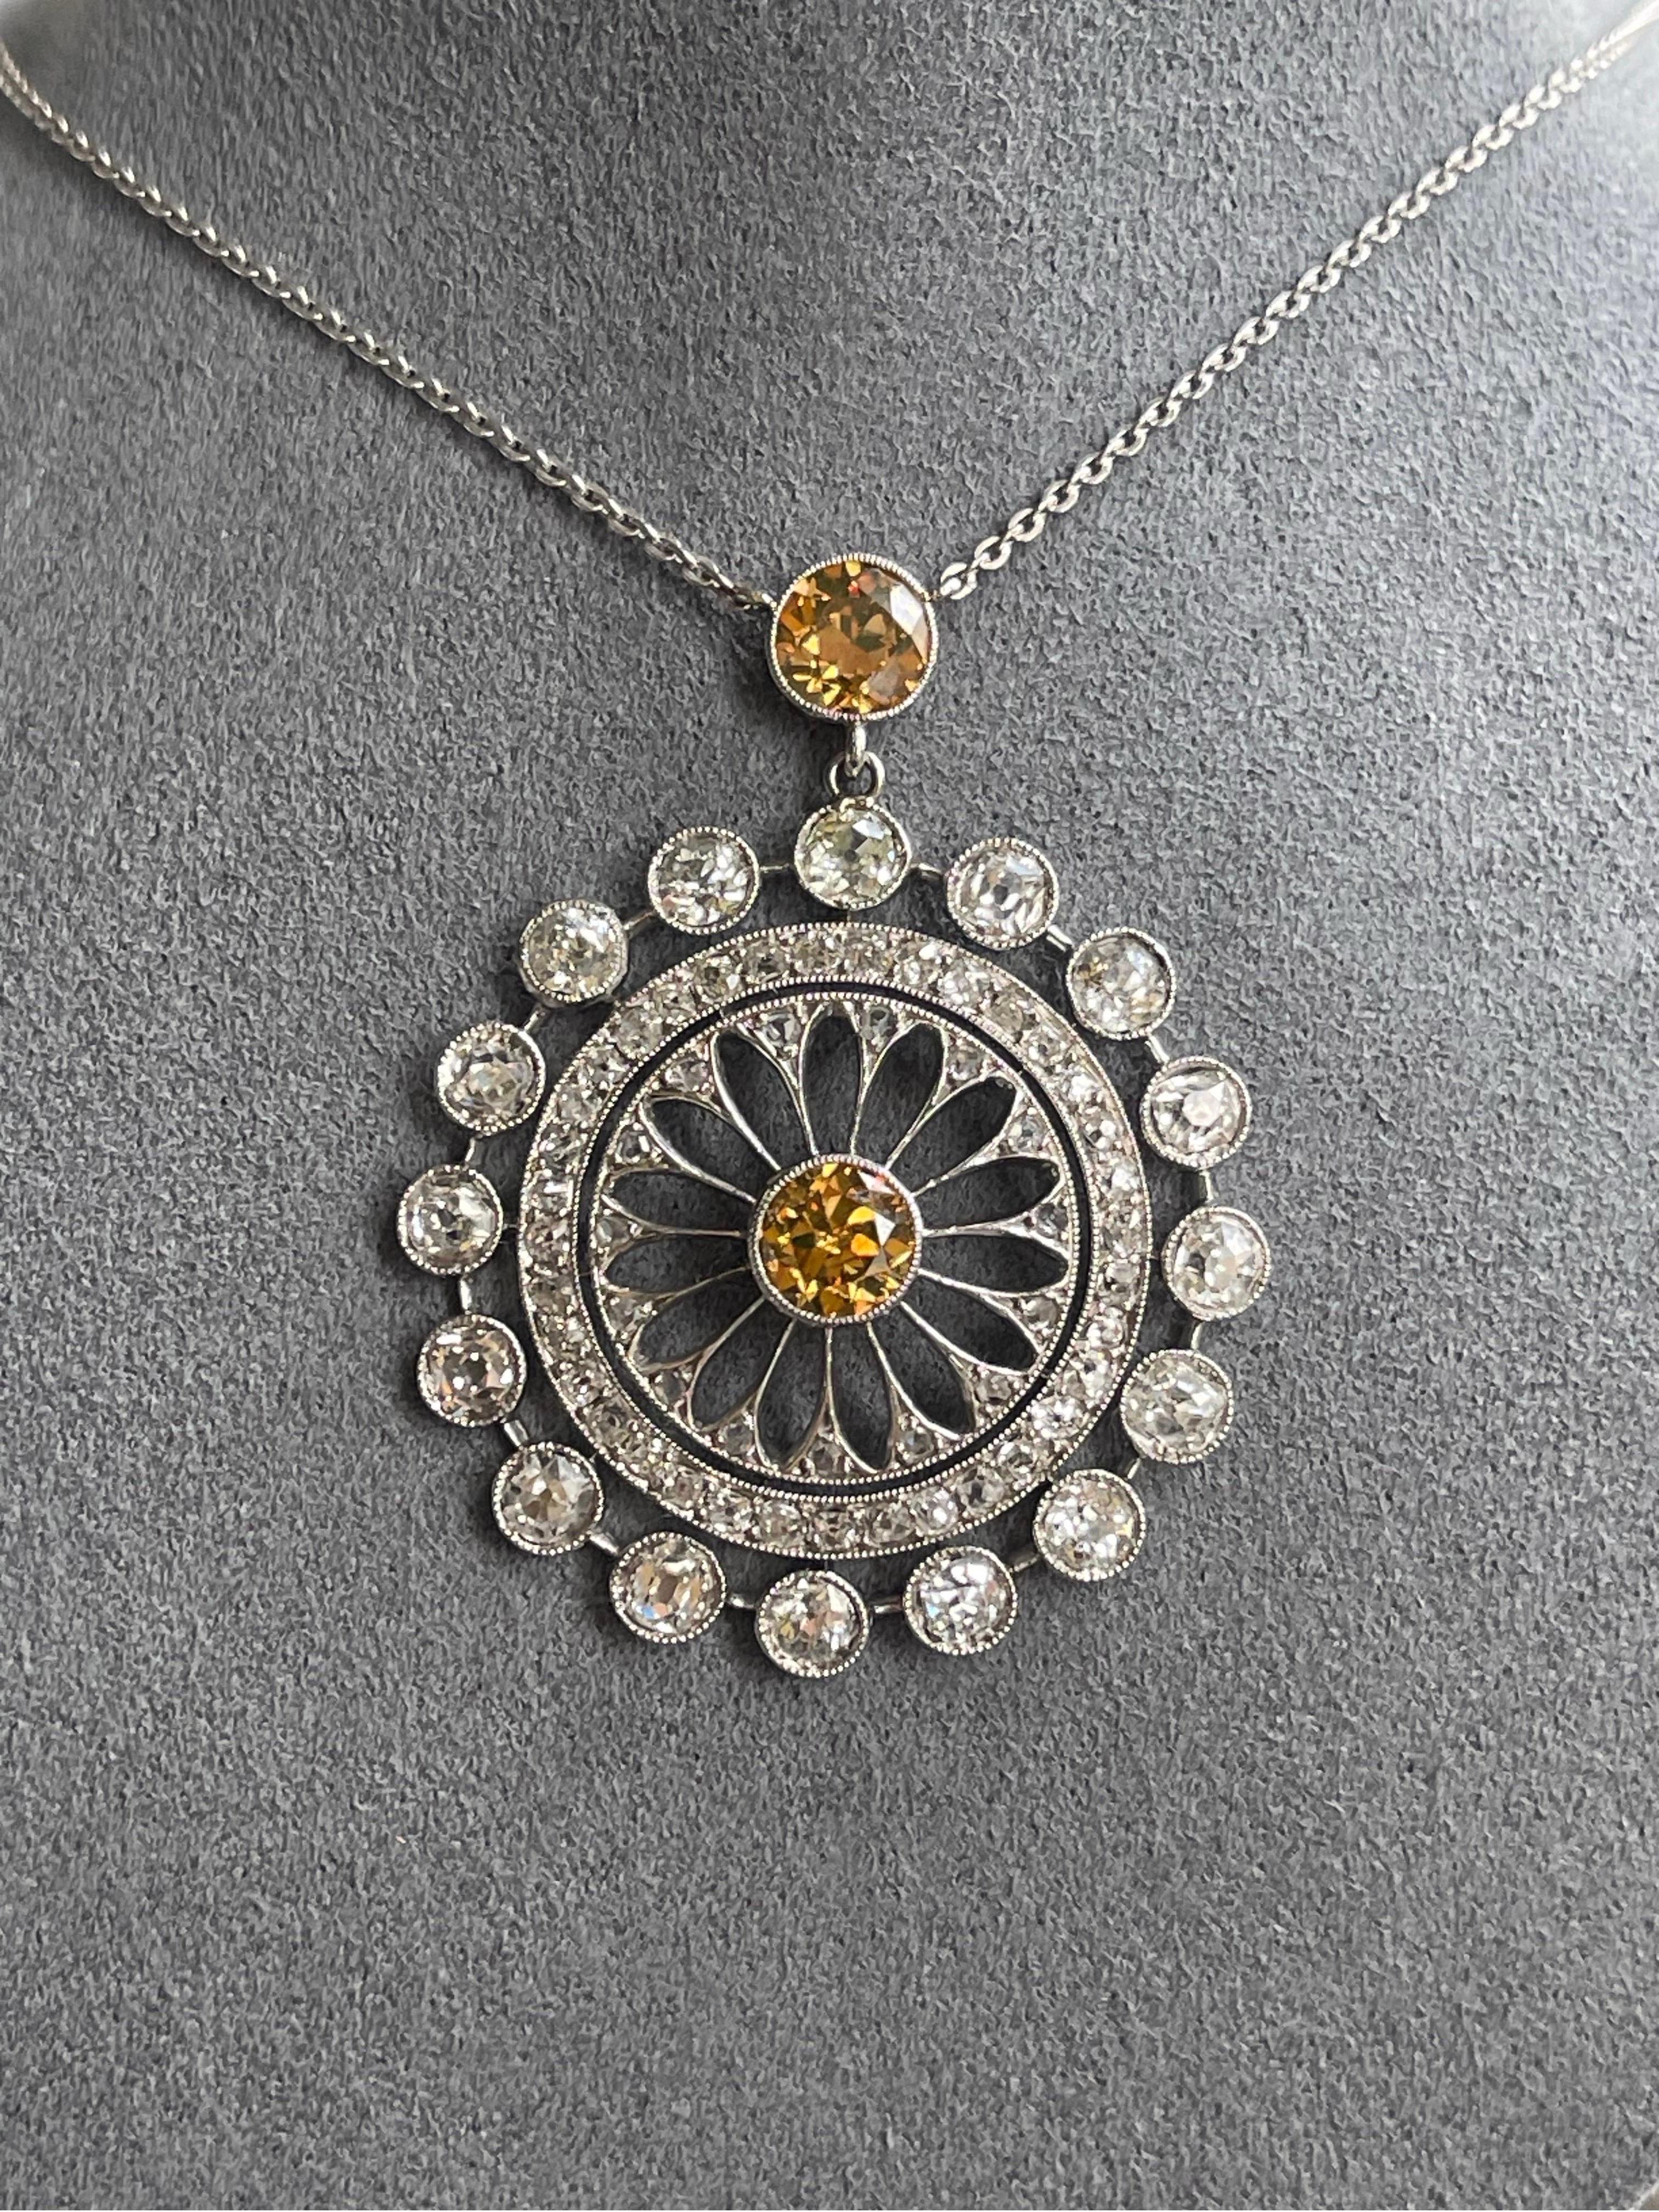 A beautiful Original Edwardian Circular Open Filigree Diamond Necklace.
The large top and center diamonds are a orange brown color approx. 1.10 CTW and the rest is embellished with white old european diamonds & mixed old cuts= Approx. 3.00